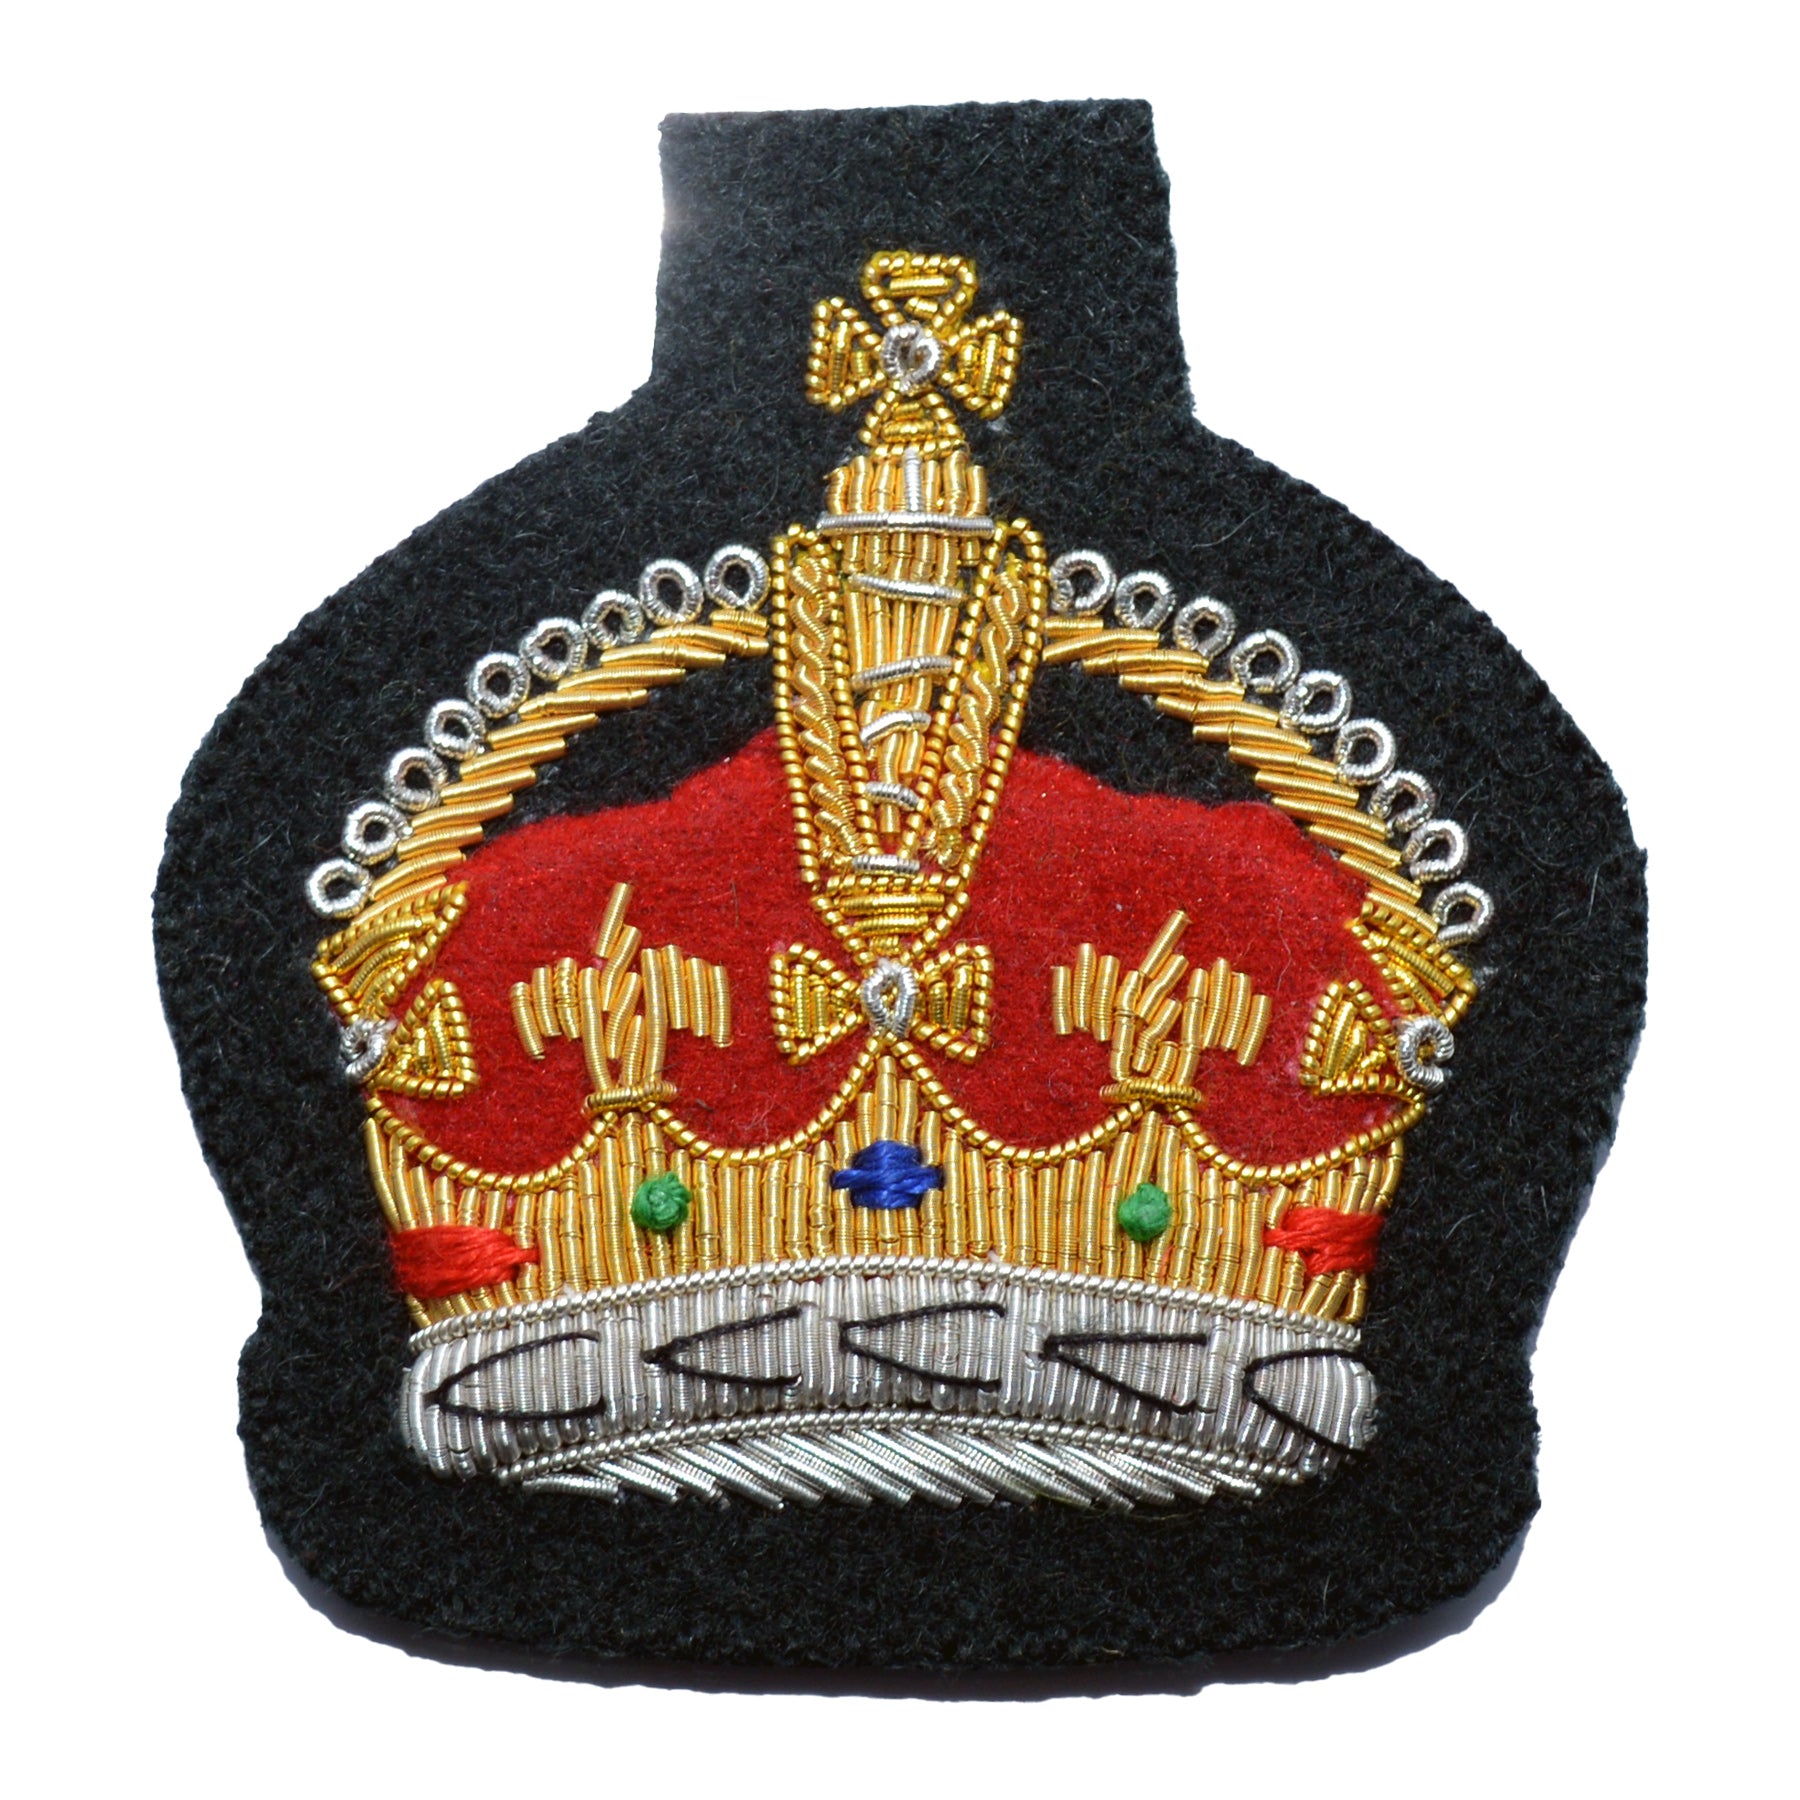 (King's Crown) All Scottish Regiments Large Crown Rank Badge Warrant Officer Class 2 (WO2) and NCO British Army